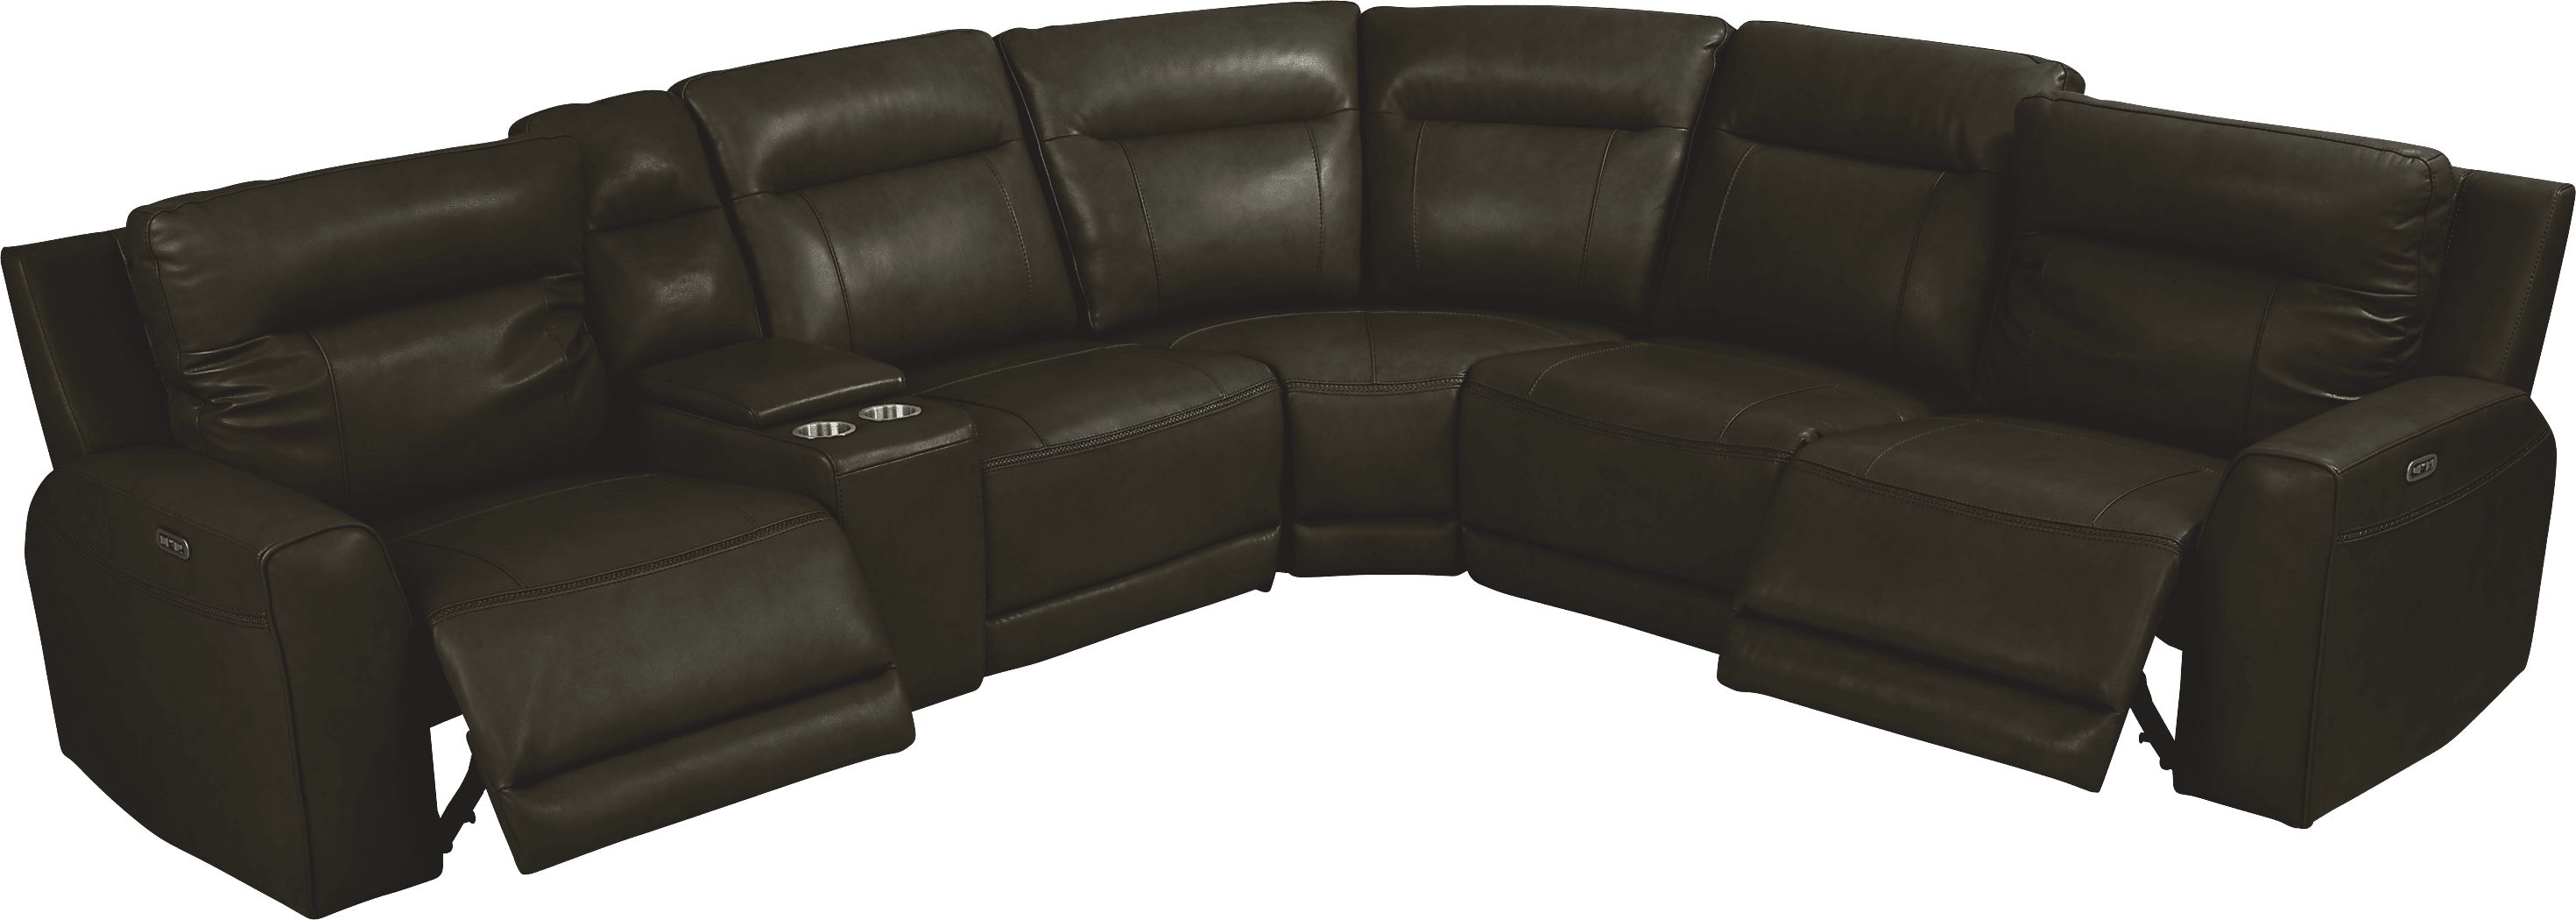 Bargotti Charcoal Leather 6 Pc Dual Power Reclining Sectional